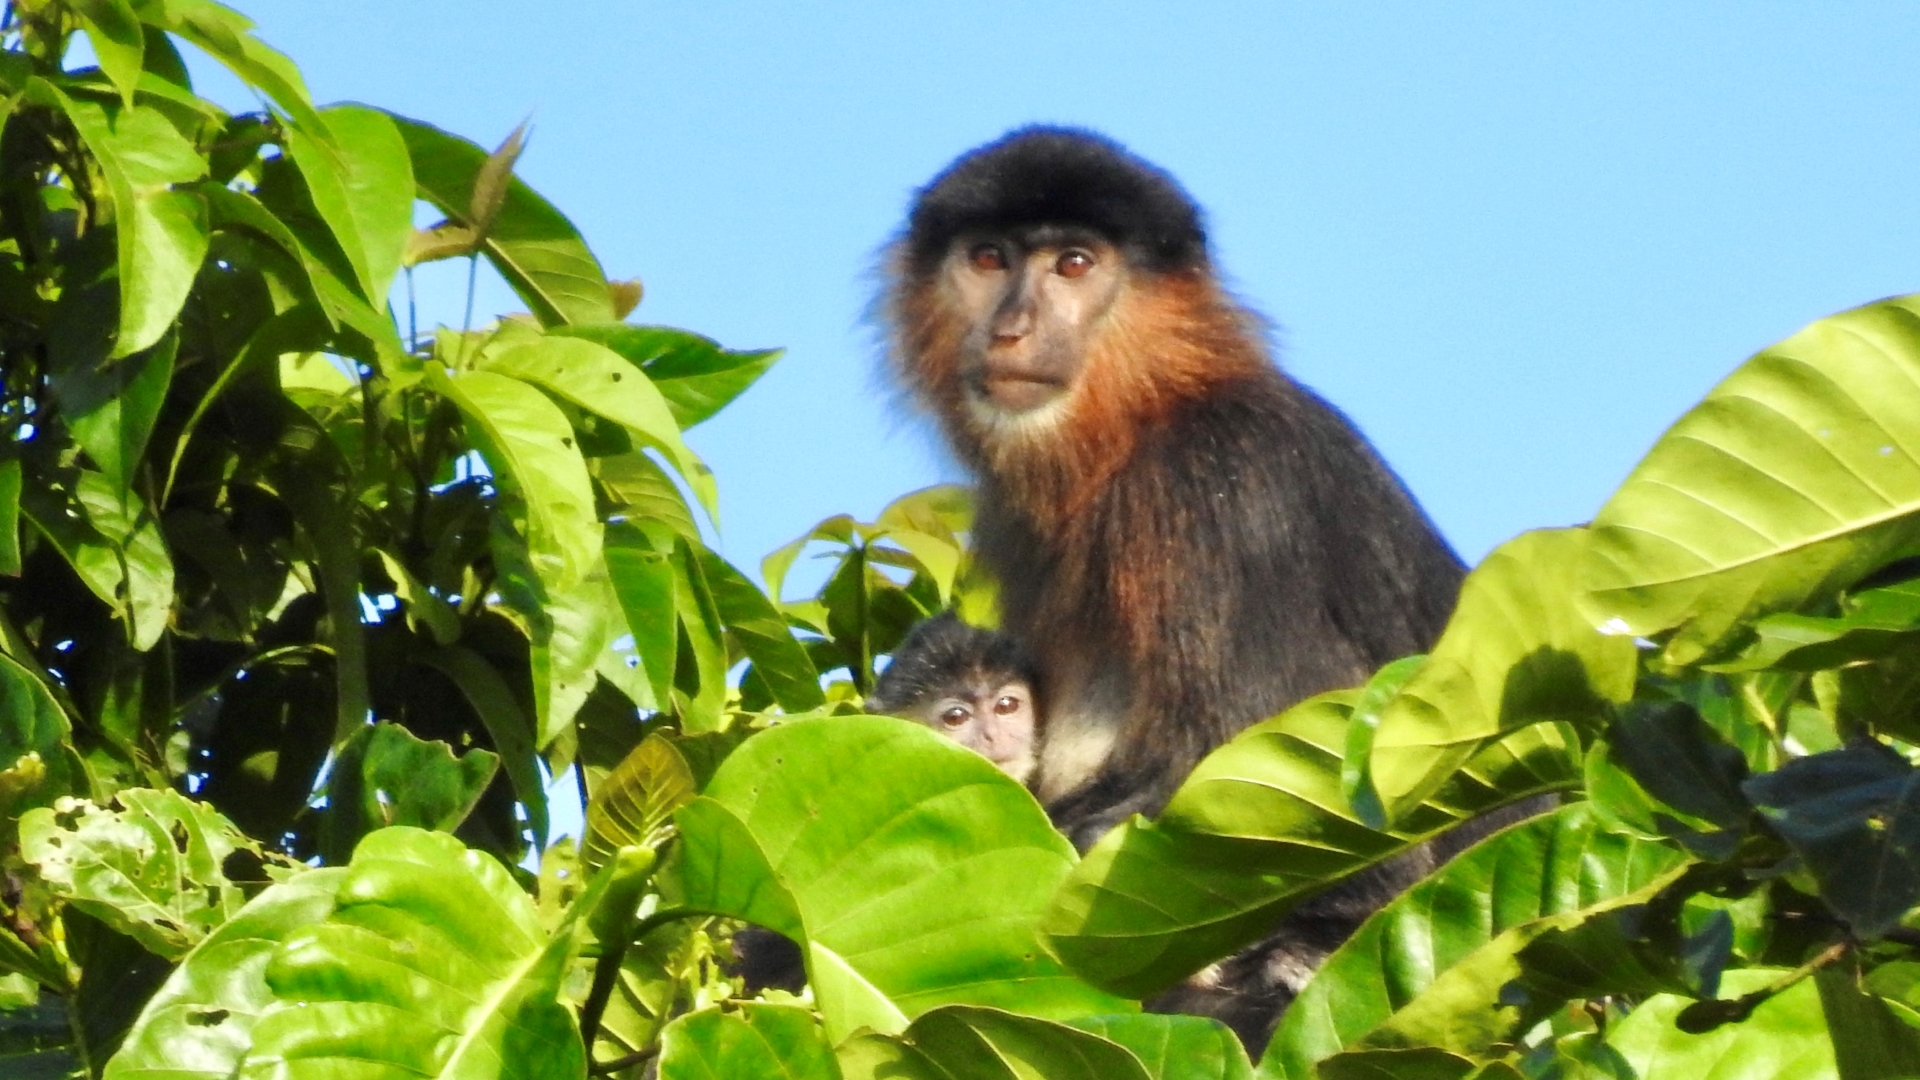 A 'mystery monkey' in Borneo may be a rare, worrisome hybrid